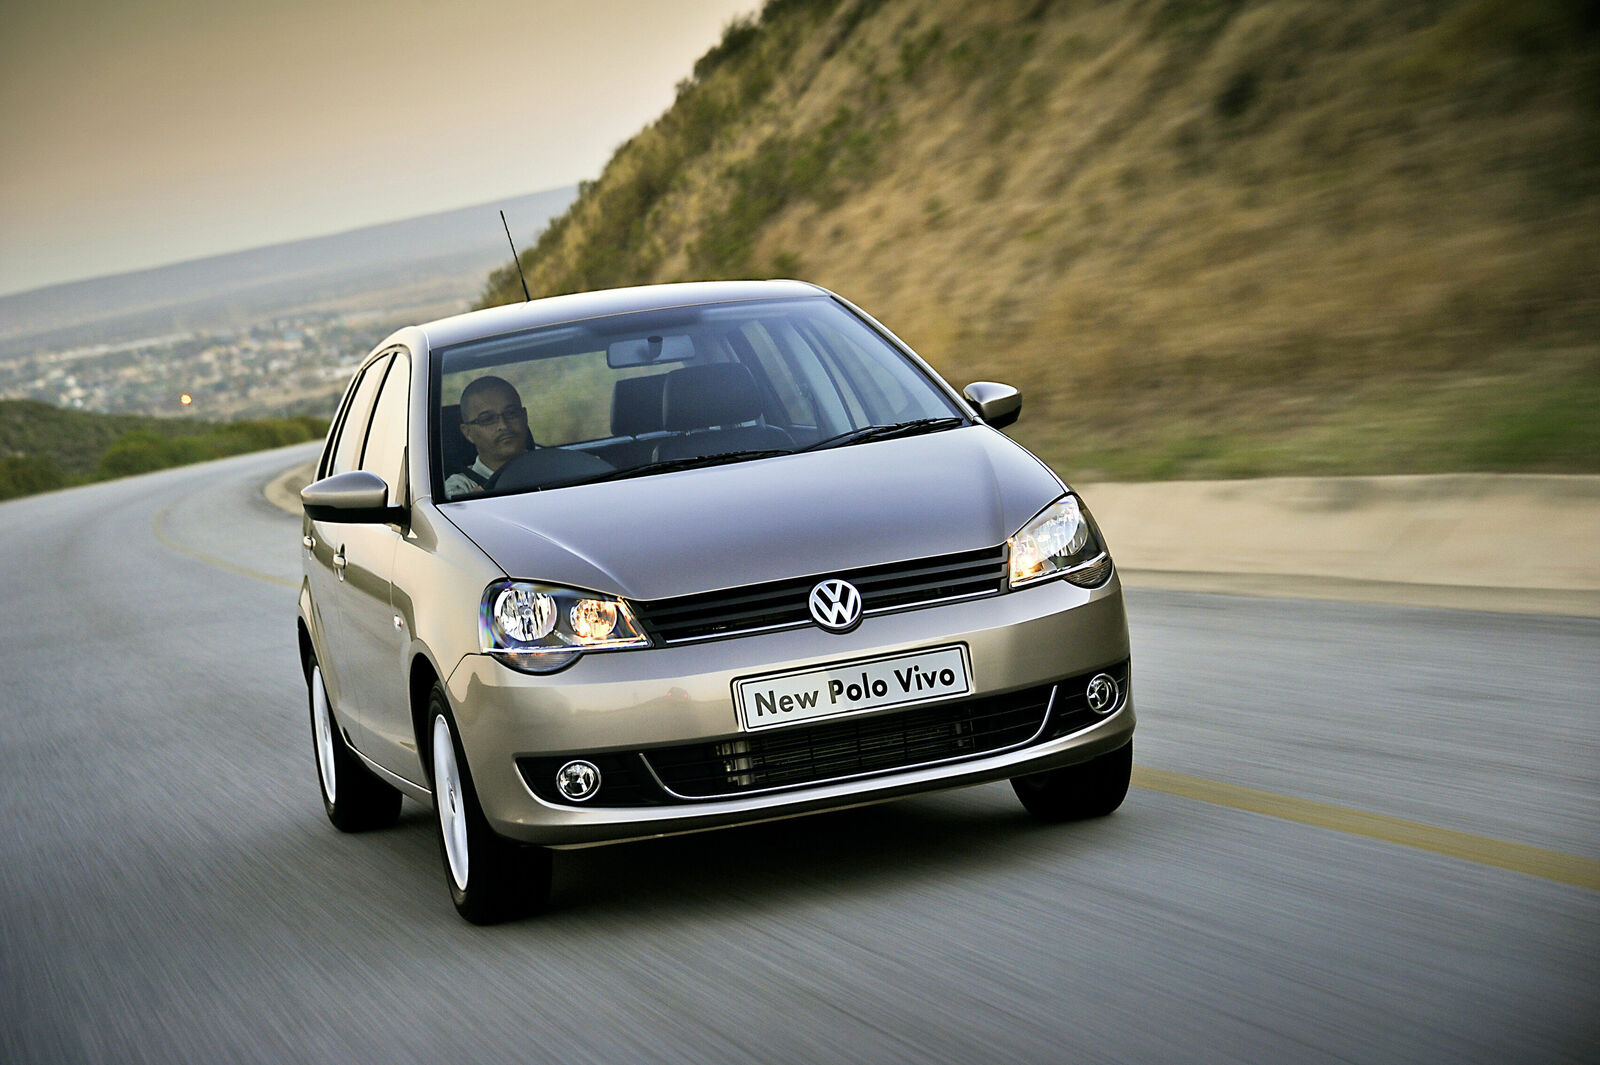 Volkswagen expands Africa strategy - Vehicle production in Kenya planned